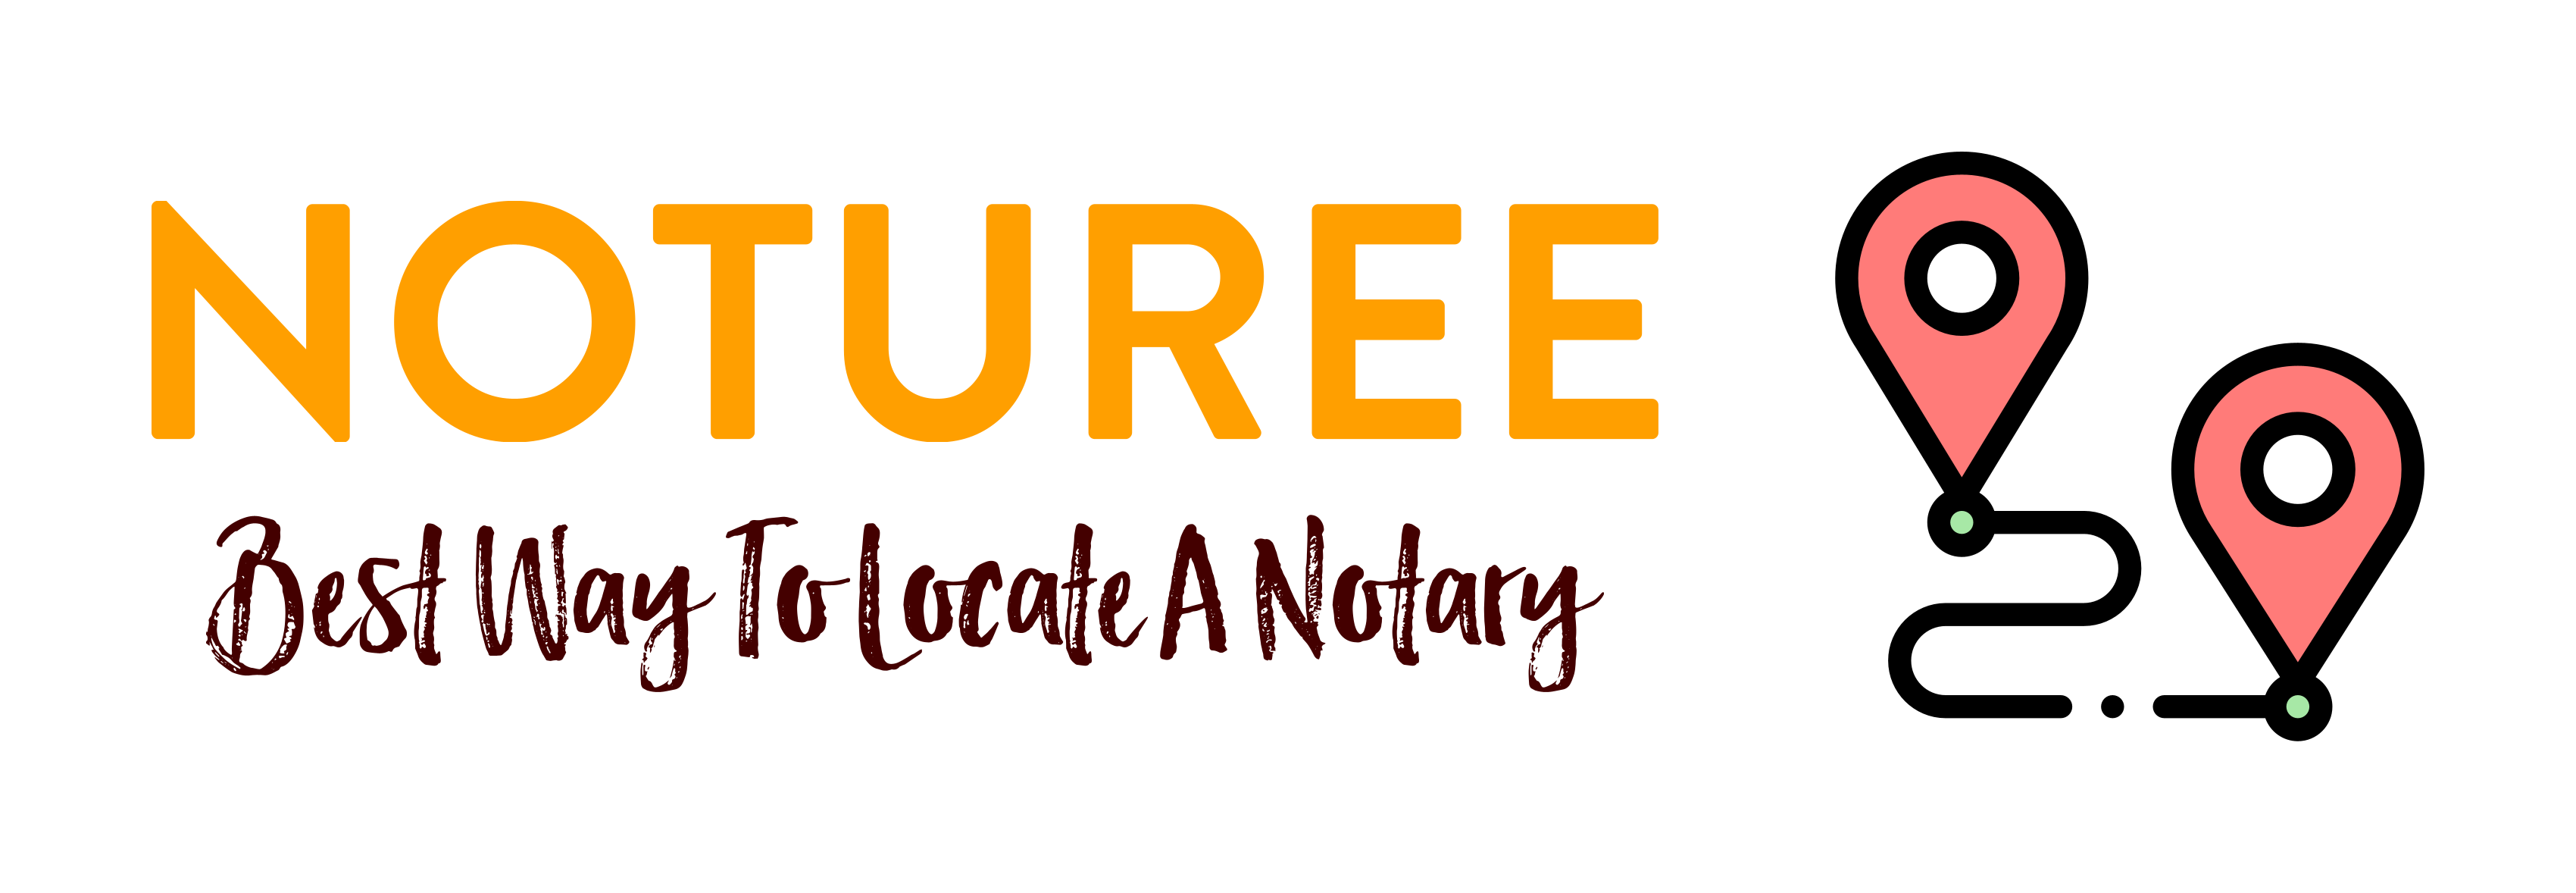 Introducing NOTUREE, The Ultimate Uber Platform For Notaries